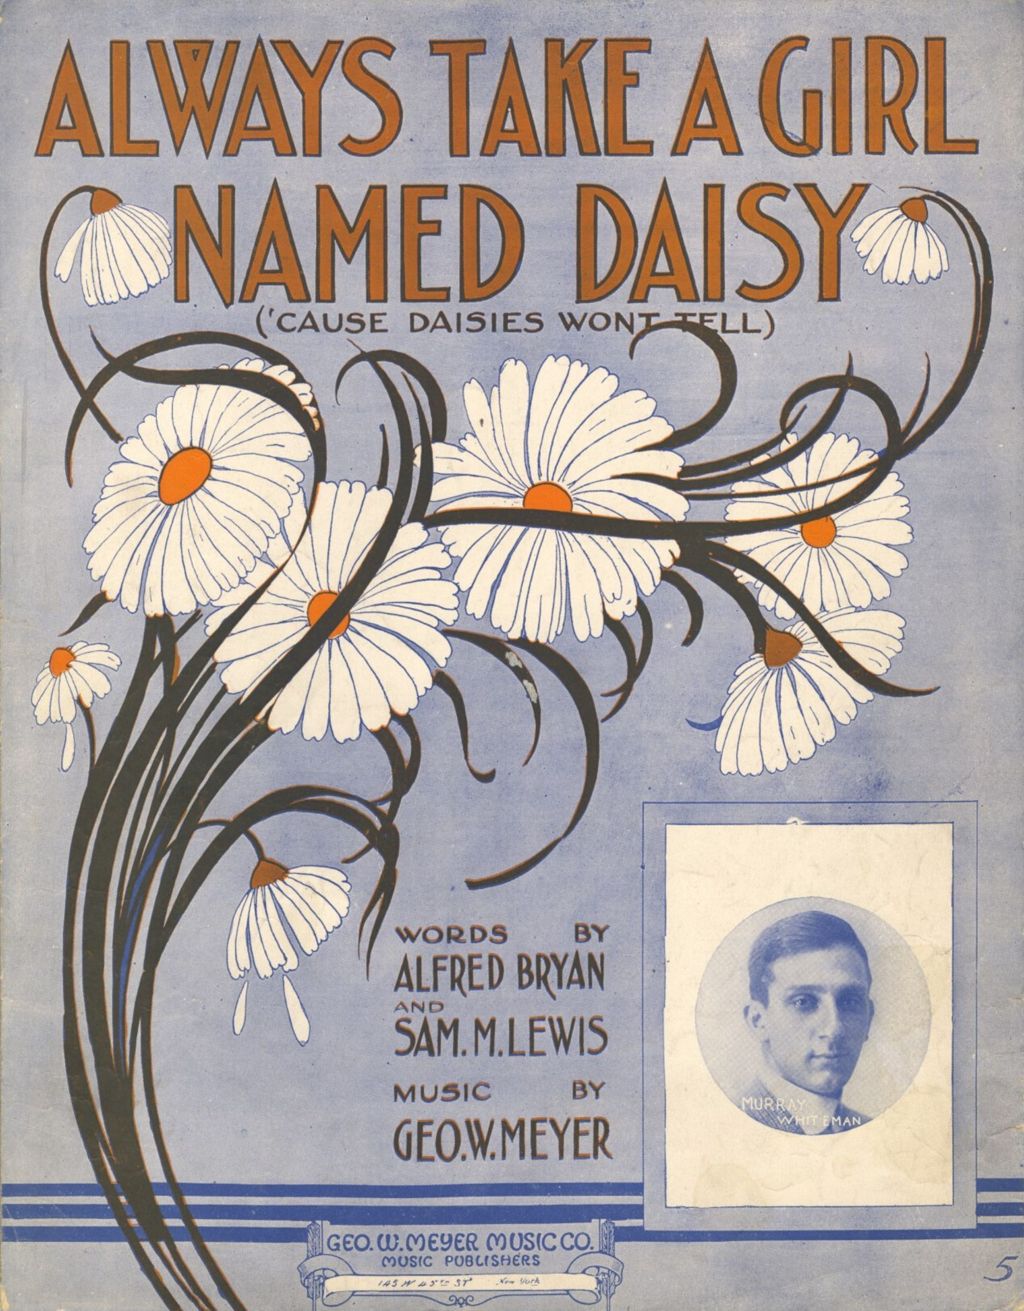 Always Take a Girl Named "Daisy" ('Cause Daisies Won't Tell)